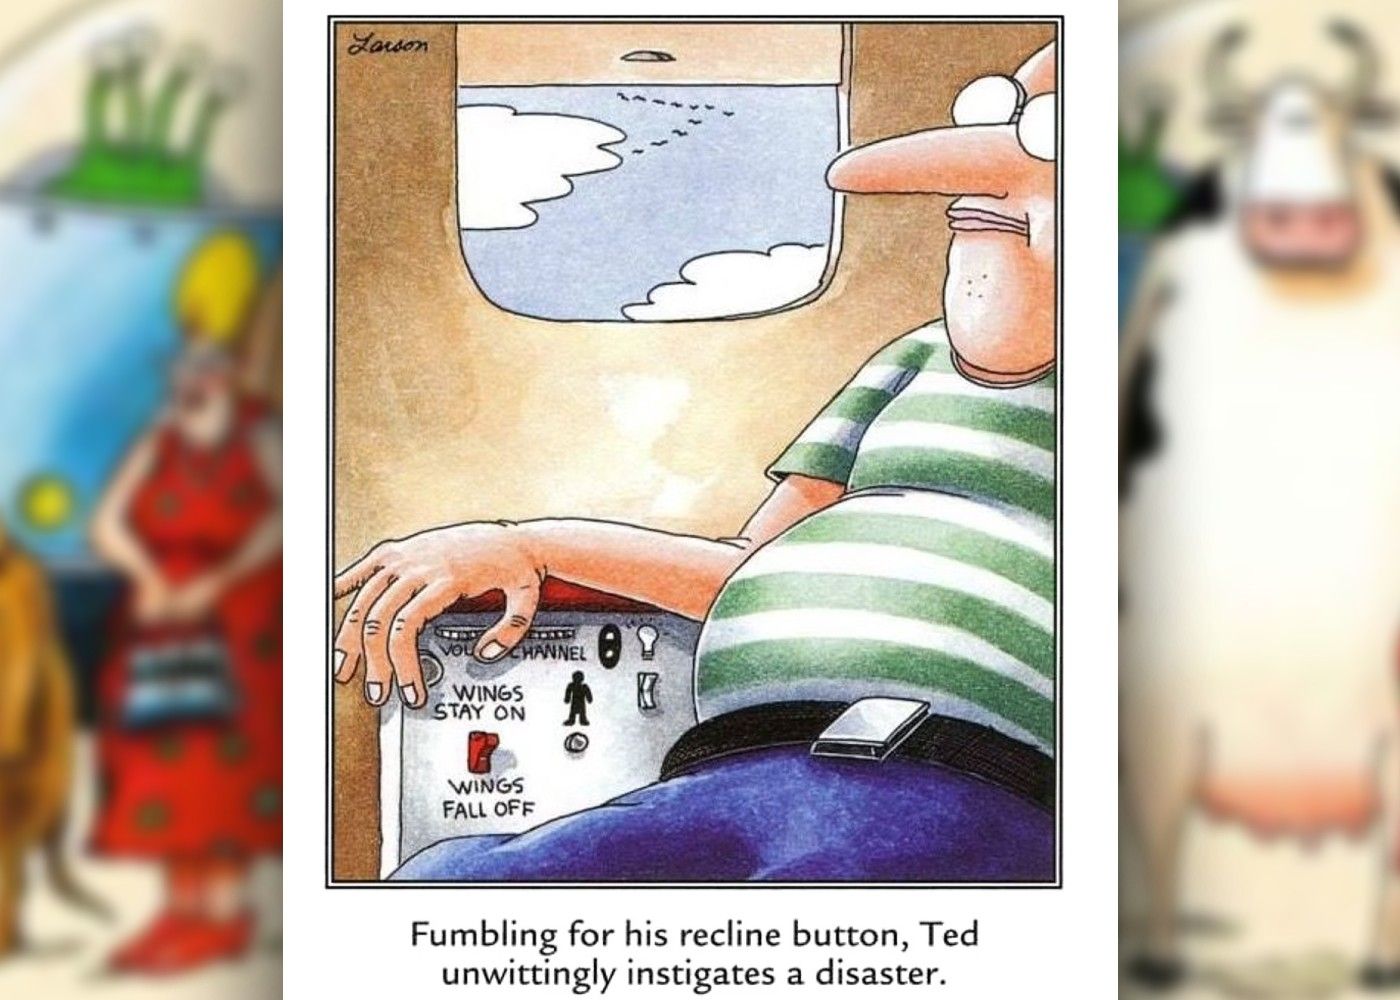 far side comic where plane has wings fall off button